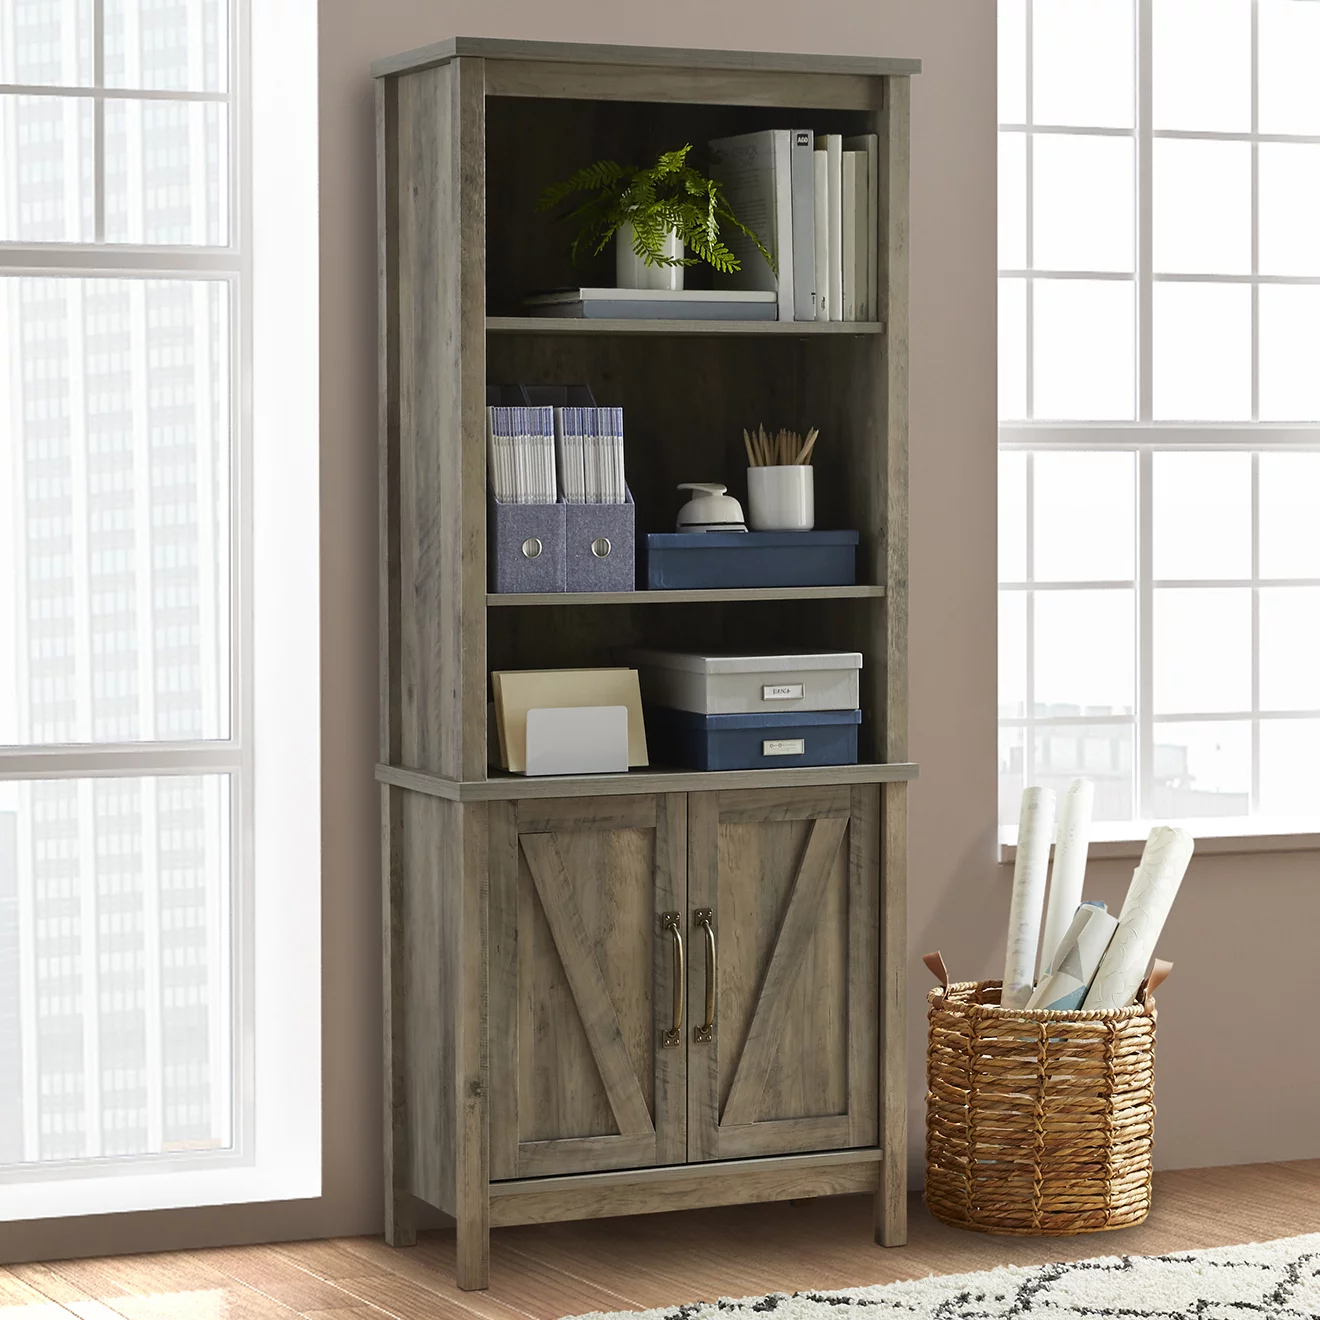 Better Homes & Gardens Modern Farmhouse 5 Shelf Library Bookcase with Doors, Rustic Gray Finish